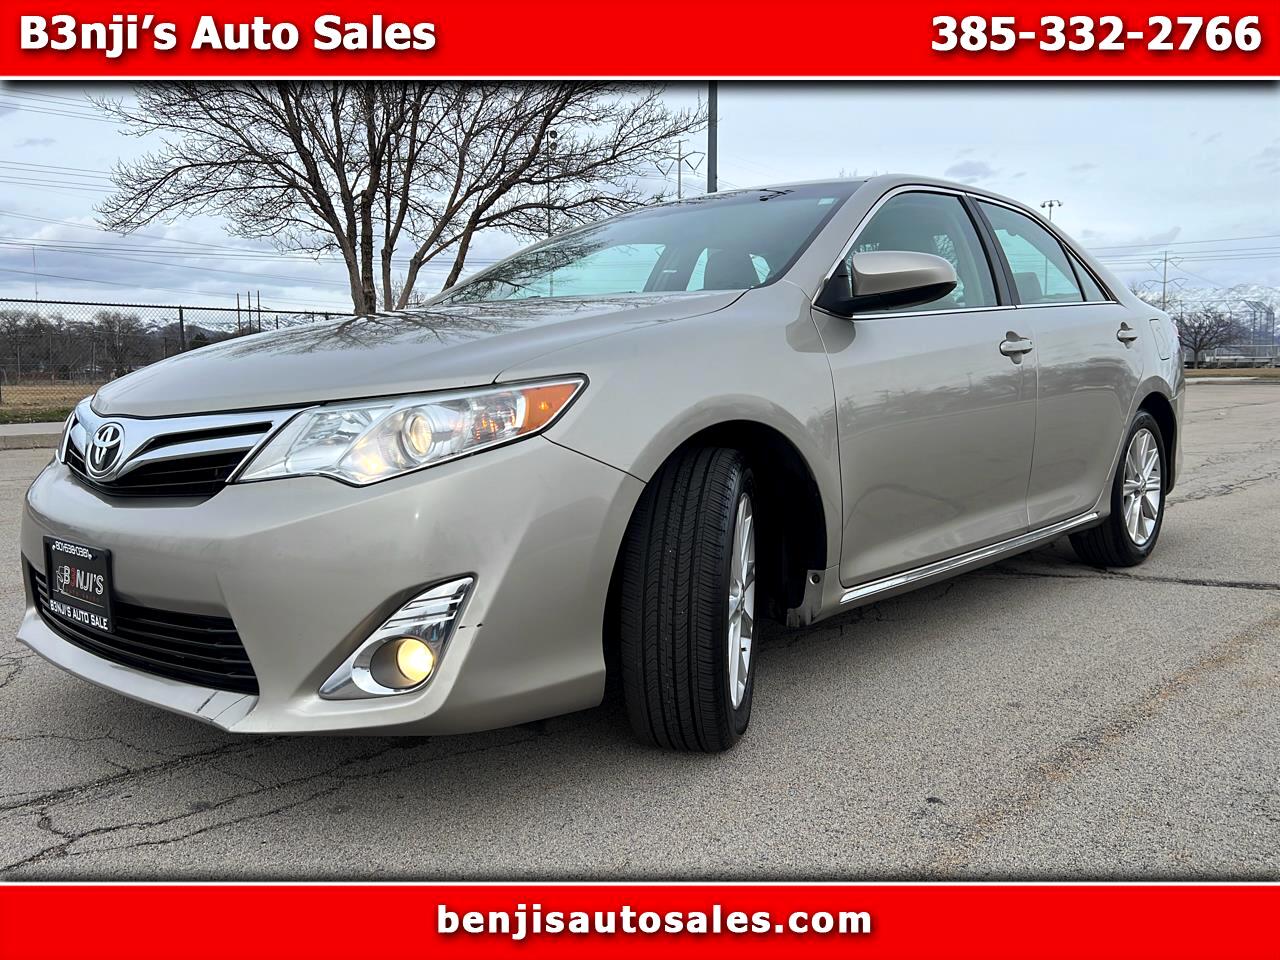 2014 Toyota Camry 4dr Sdn XLE Auto (Natl)